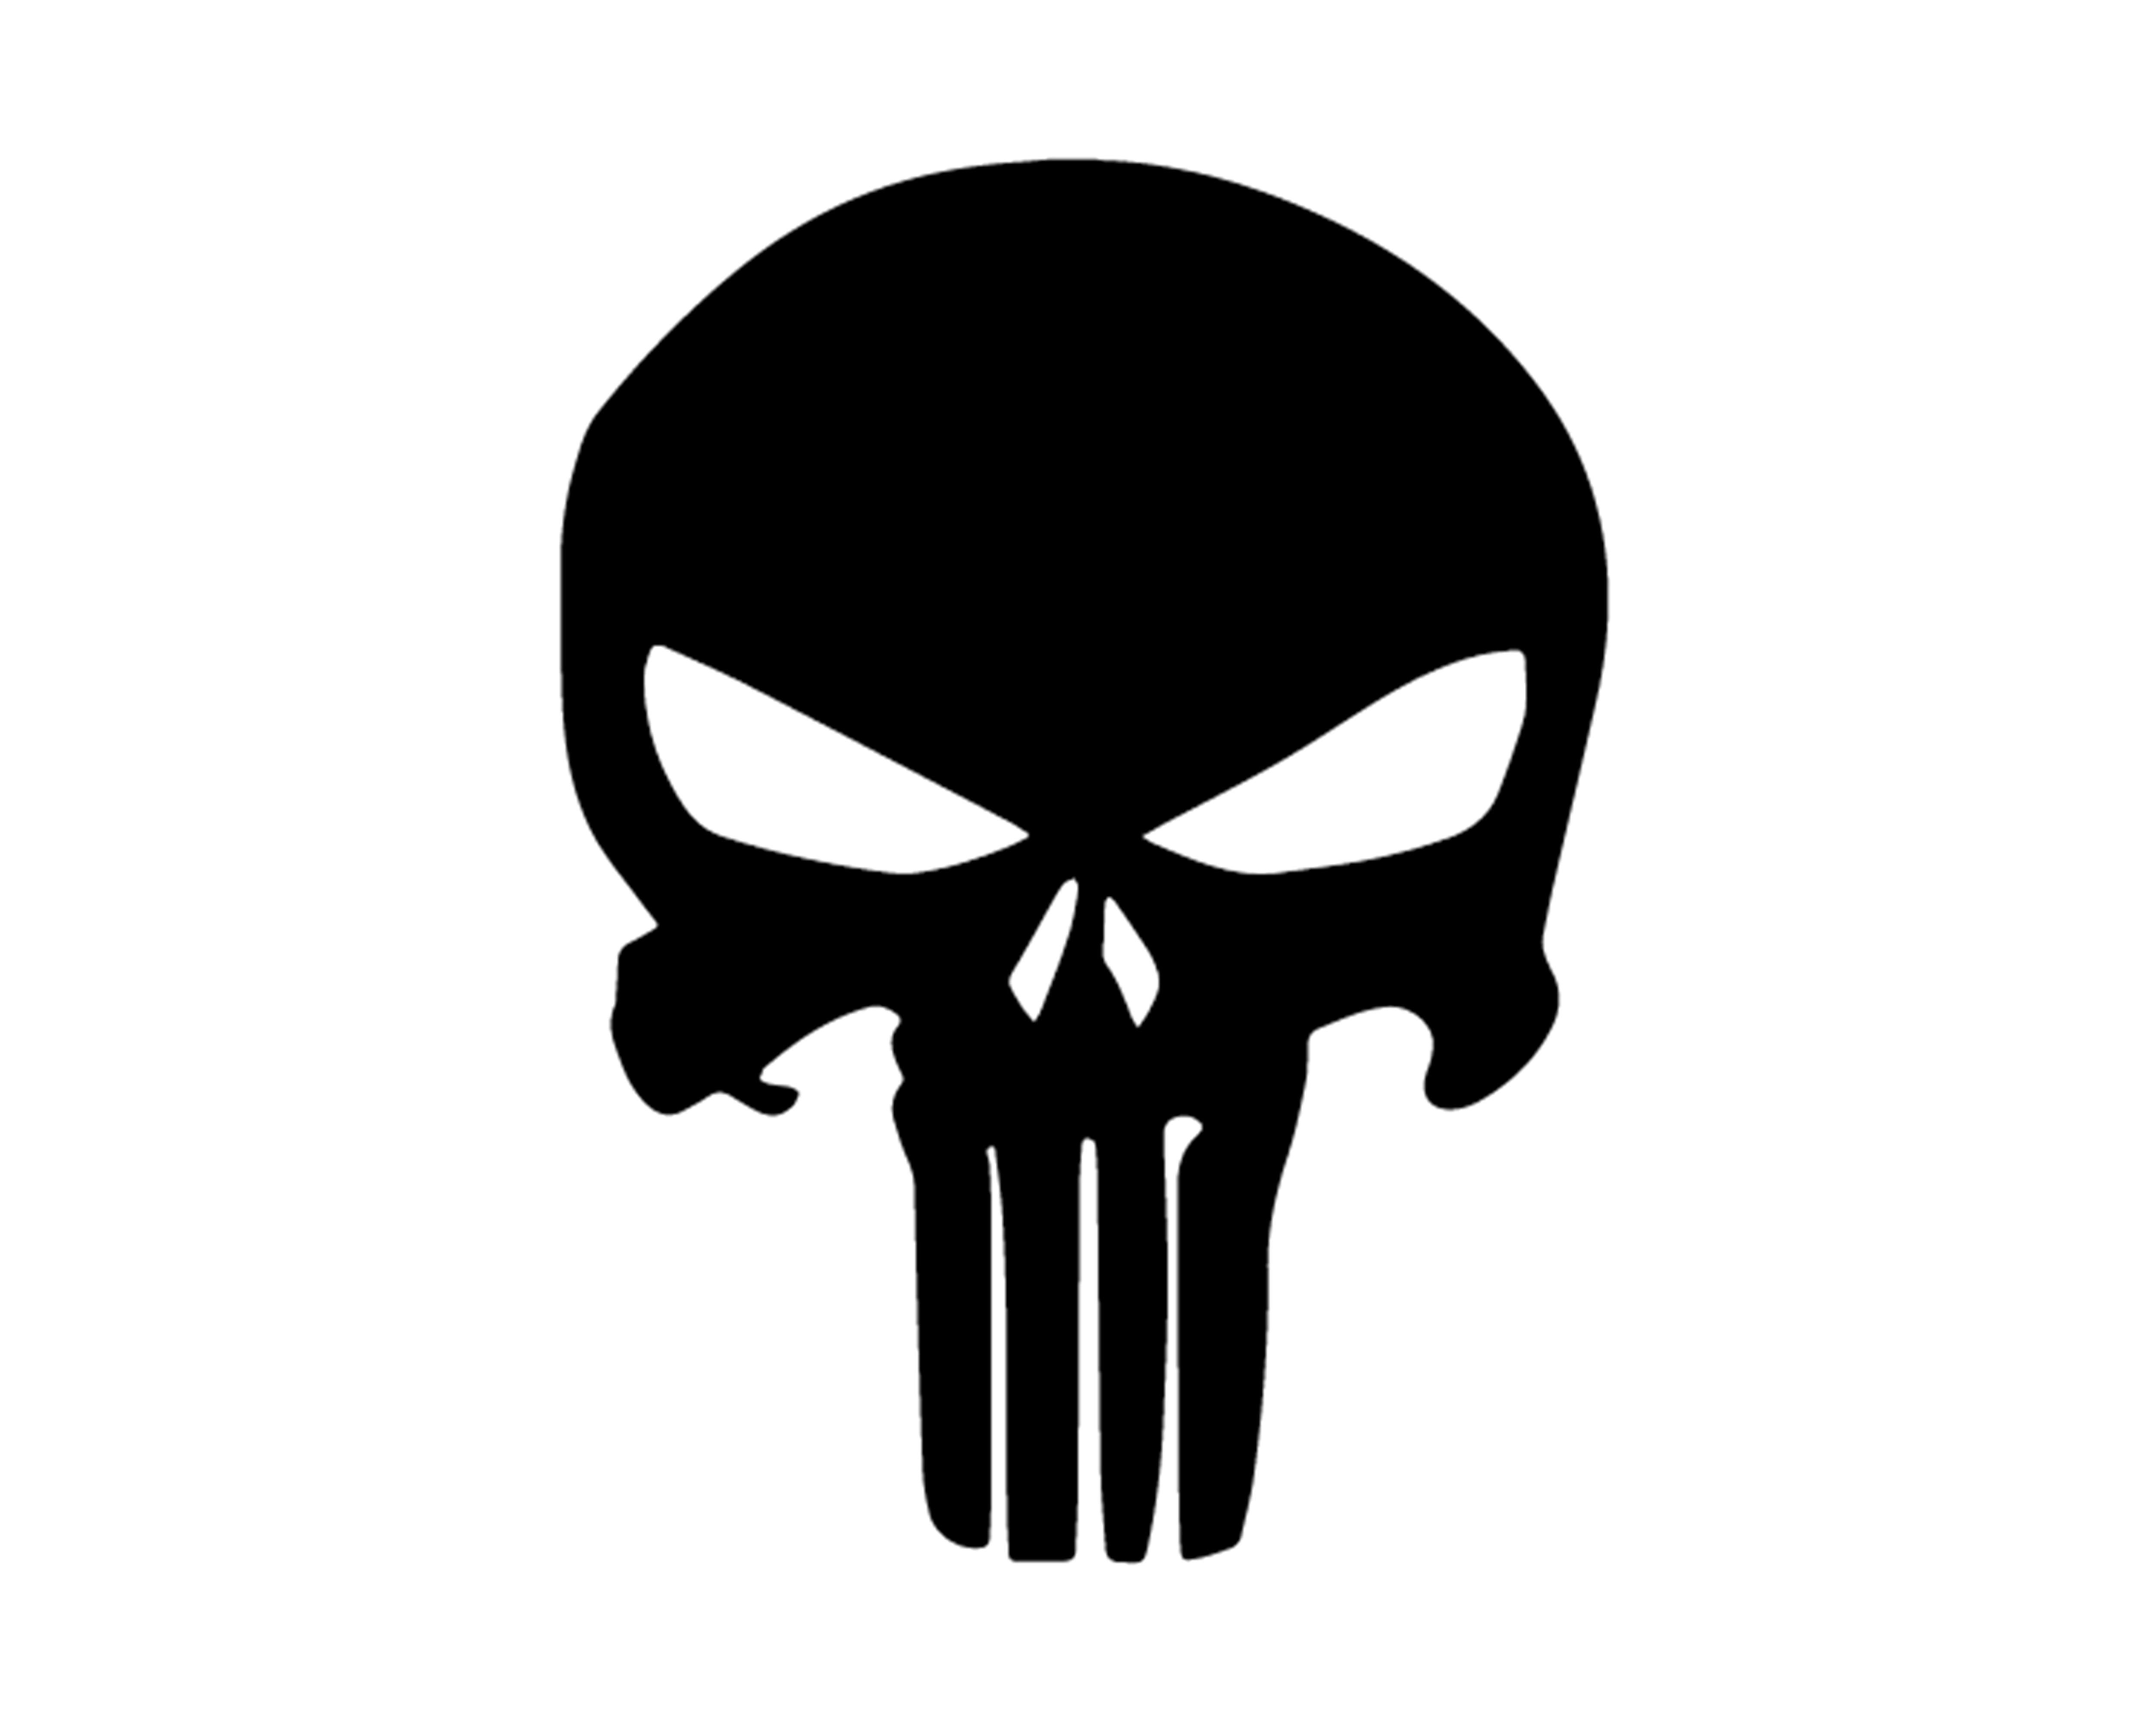 Punisher Logo - THE PUNISHER LOGO VINYL PAINTING STENCIL SIZE PACK *HIGH QUALITY ...